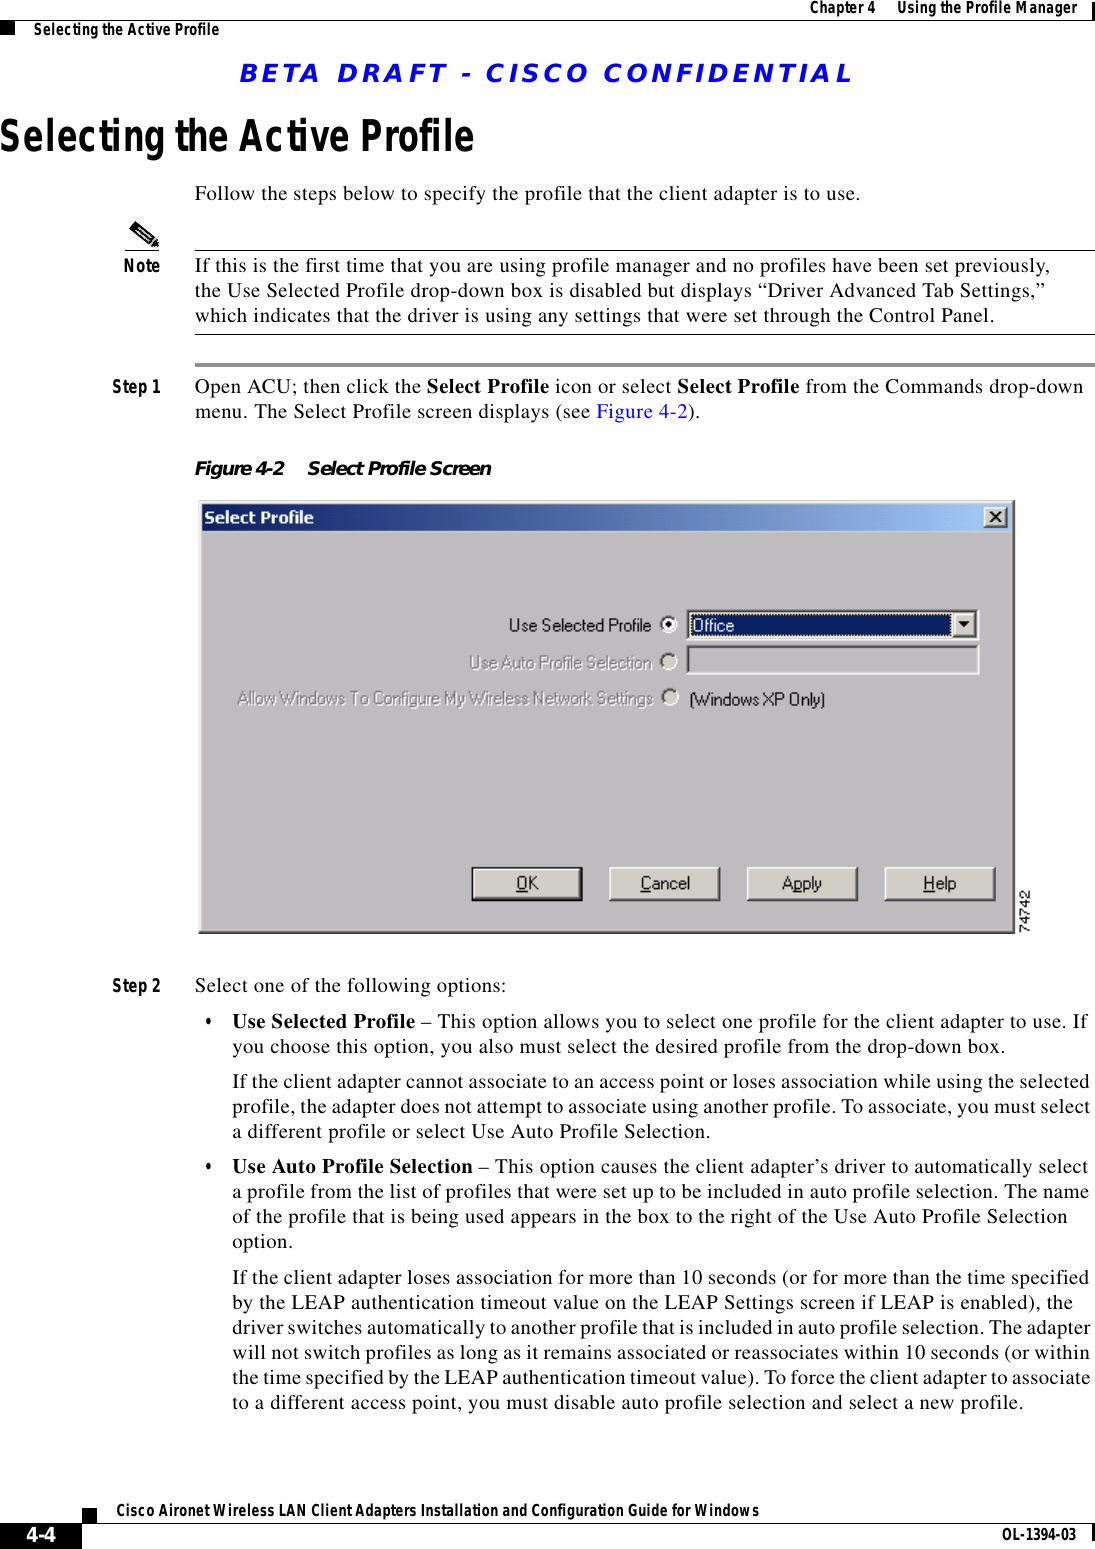 BETA DRAFT - CISCO CONFIDENTIAL4-4Cisco Aironet Wireless LAN Client Adapters Installation and Configuration Guide for Windows OL-1394-03Chapter 4      Using the Profile ManagerSelecting the Active ProfileSelecting the Active ProfileFollow the steps below to specify the profile that the client adapter is to use.Note If this is the first time that you are using profile manager and no profiles have been set previously, the Use Selected Profile drop-down box is disabled but displays “Driver Advanced Tab Settings,” which indicates that the driver is using any settings that were set through the Control Panel.Step 1 Open ACU; then click the Select Profile icon or select Select Profile from the Commands drop-down menu. The Select Profile screen displays (see Figure 4-2).Figure 4-2 Select Profile ScreenStep 2 Select one of the following options:•Use Selected Profile – This option allows you to select one profile for the client adapter to use. If you choose this option, you also must select the desired profile from the drop-down box.If the client adapter cannot associate to an access point or loses association while using the selected profile, the adapter does not attempt to associate using another profile. To associate, you must select a different profile or select Use Auto Profile Selection.•Use Auto Profile Selection – This option causes the client adapter’s driver to automatically select a profile from the list of profiles that were set up to be included in auto profile selection. The name of the profile that is being used appears in the box to the right of the Use Auto Profile Selection option.If the client adapter loses association for more than 10 seconds (or for more than the time specified by the LEAP authentication timeout value on the LEAP Settings screen if LEAP is enabled), the driver switches automatically to another profile that is included in auto profile selection. The adapter will not switch profiles as long as it remains associated or reassociates within 10 seconds (or within the time specified by the LEAP authentication timeout value). To force the client adapter to associate to a different access point, you must disable auto profile selection and select a new profile.